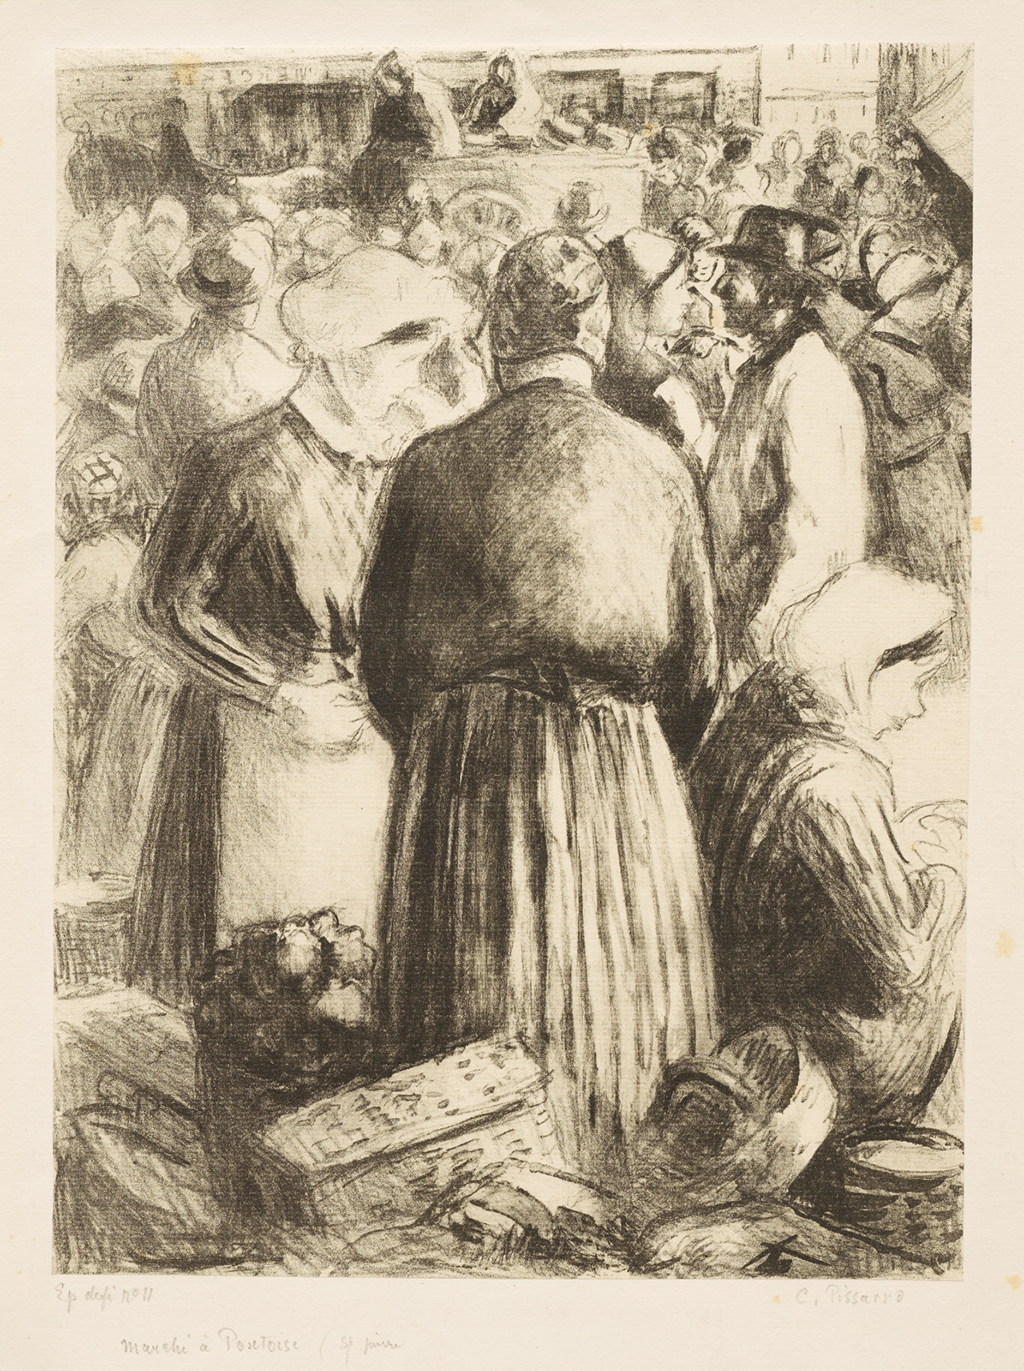 A black and white sketch of showing a woman with her back turned and facing another woman who wears a pink and white dress in a market full of people. To their right a woman with a pink cap and a blue dress sits. The women are surrounded by baskets full of produce which are being sold. Behind the women, is a crowd of people varying in color and height. In the background there are people on top of what seems to be a carriage along the sides of buildings with windows.